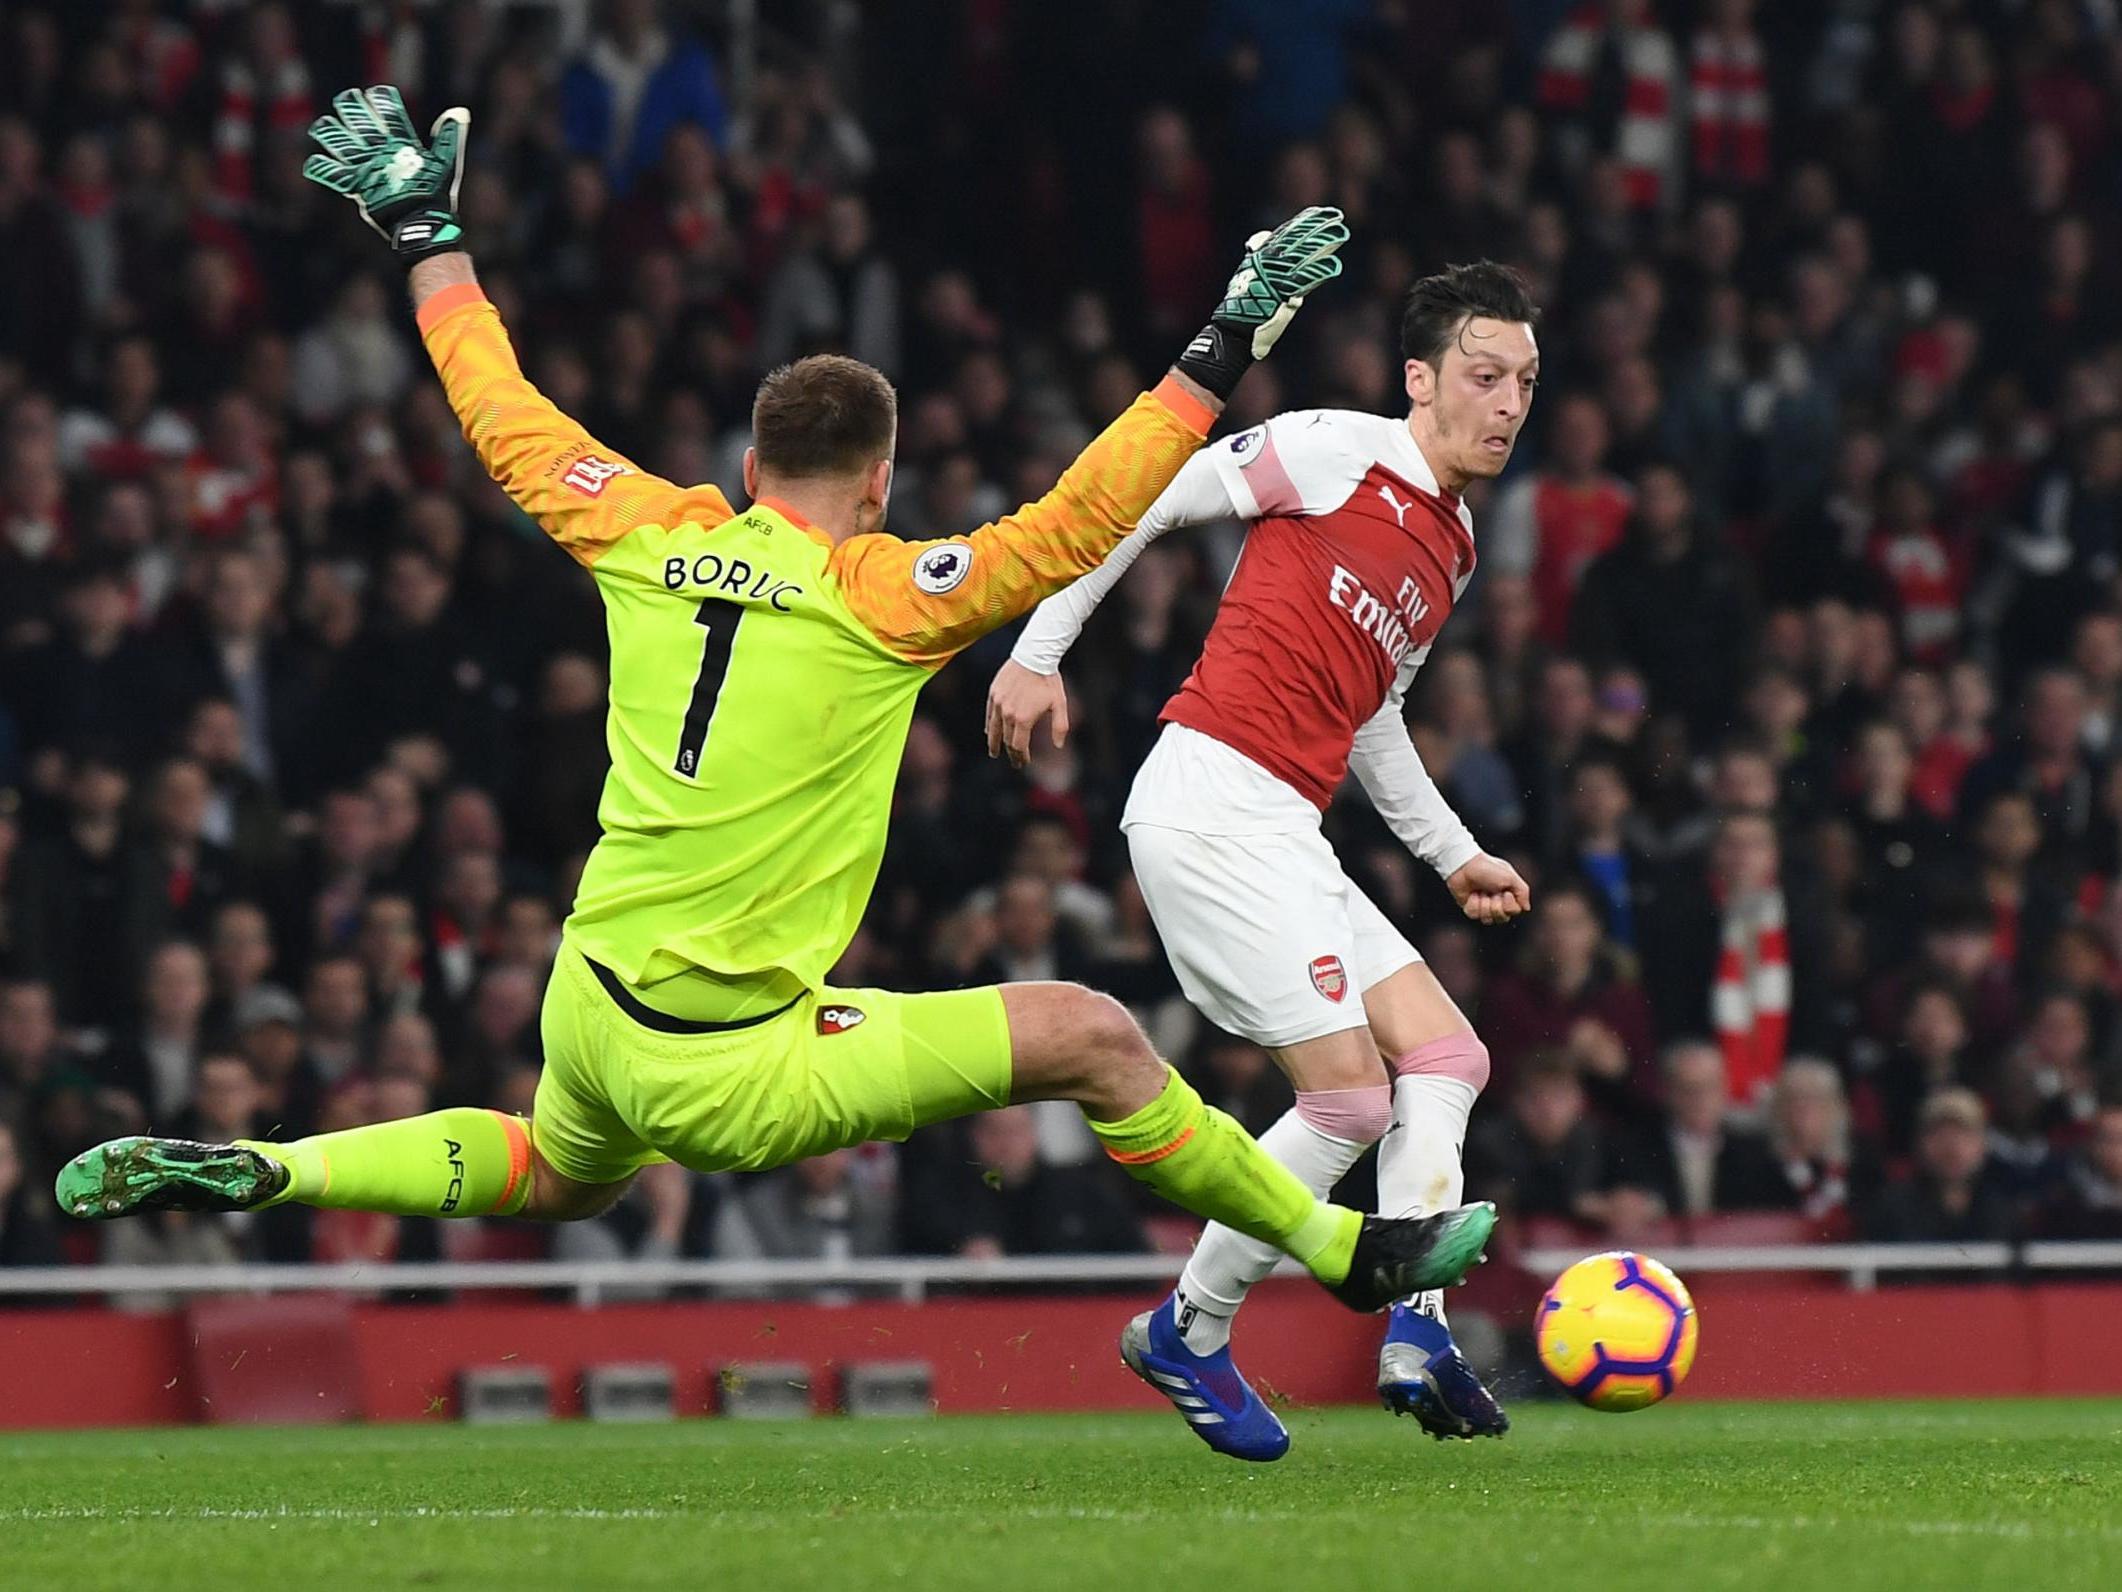 Mesut Ozil put the hosts ahead after just four minutes